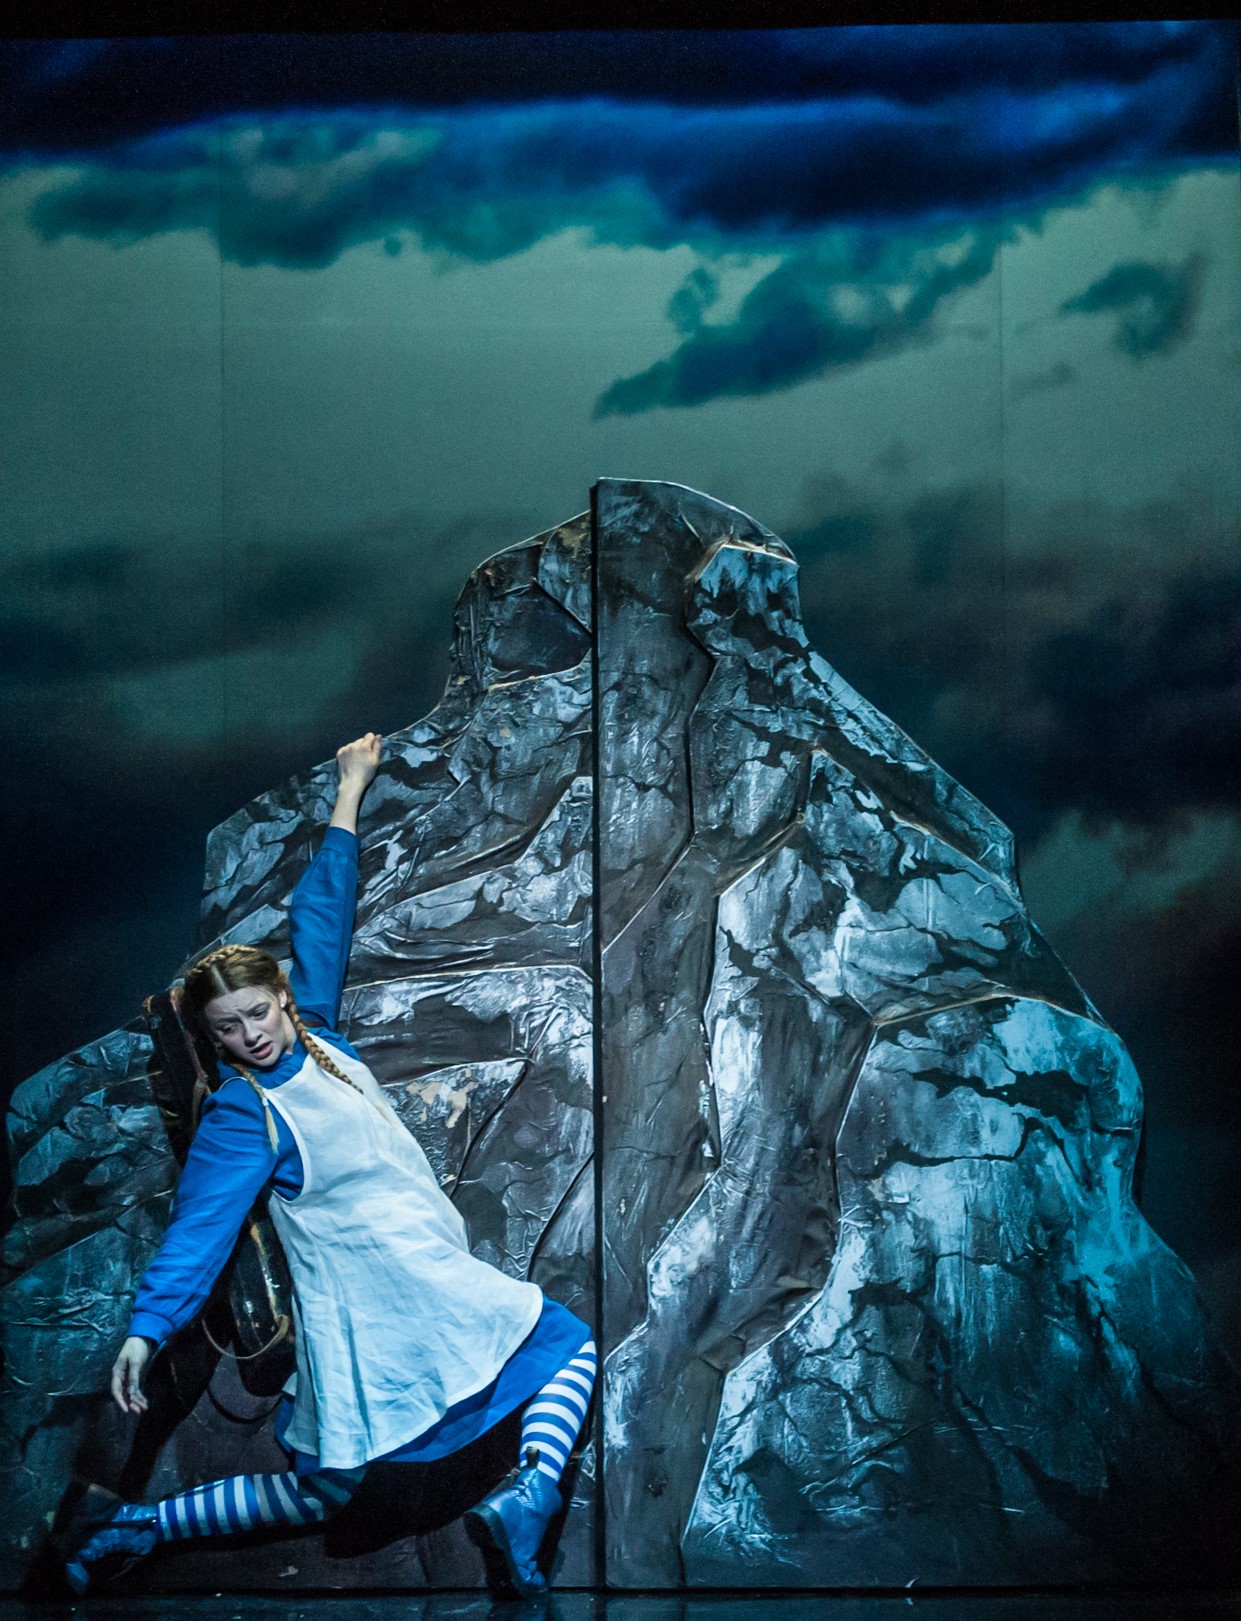 A young girl climbs with difficulty up a large mountain rock. Above her stretches the night dark sky. Stills comes the play "The Fiddlee Girl"